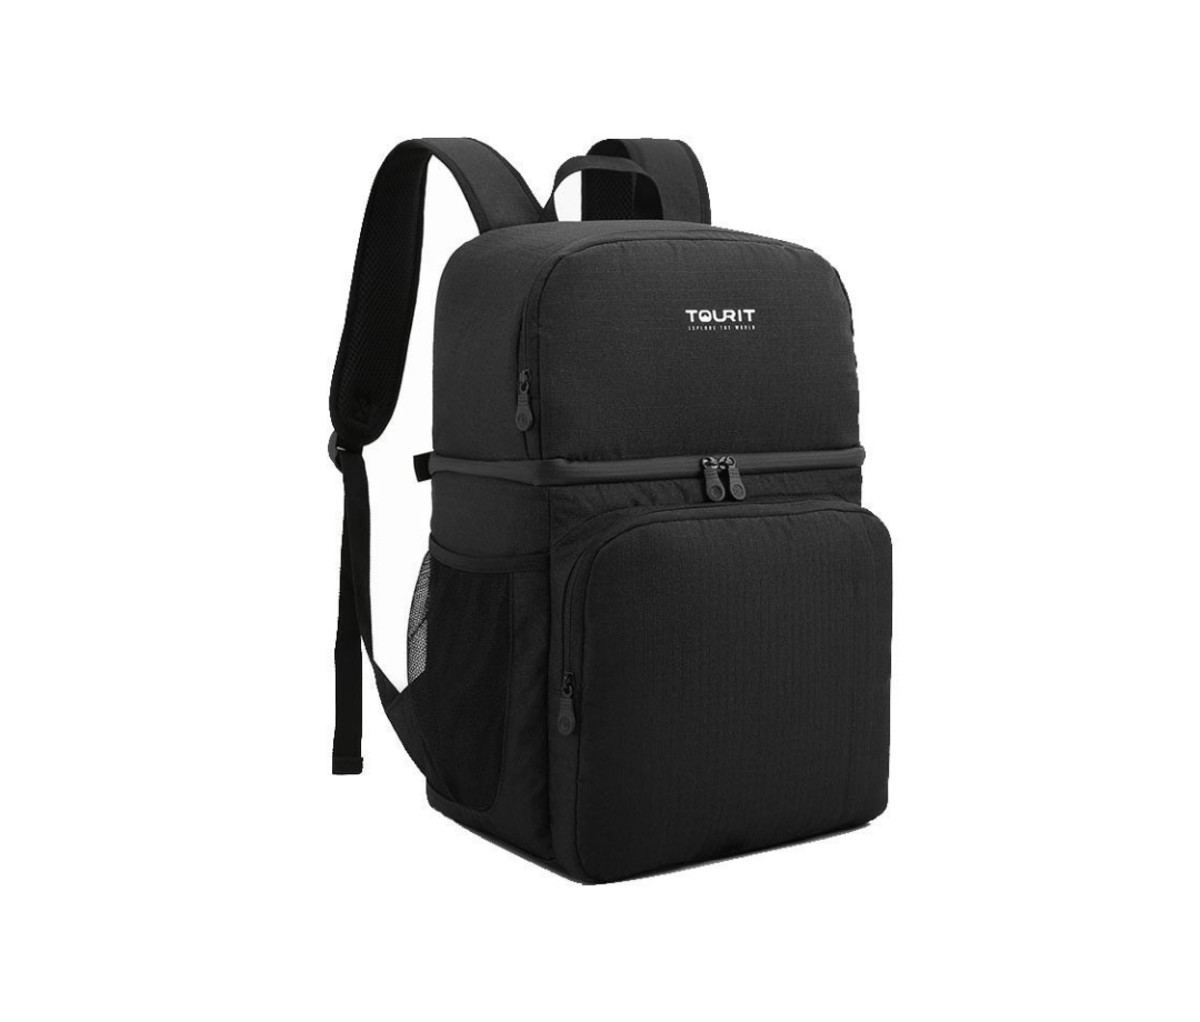 TOURIT Premium 16-Can Soft Cooler Backpack